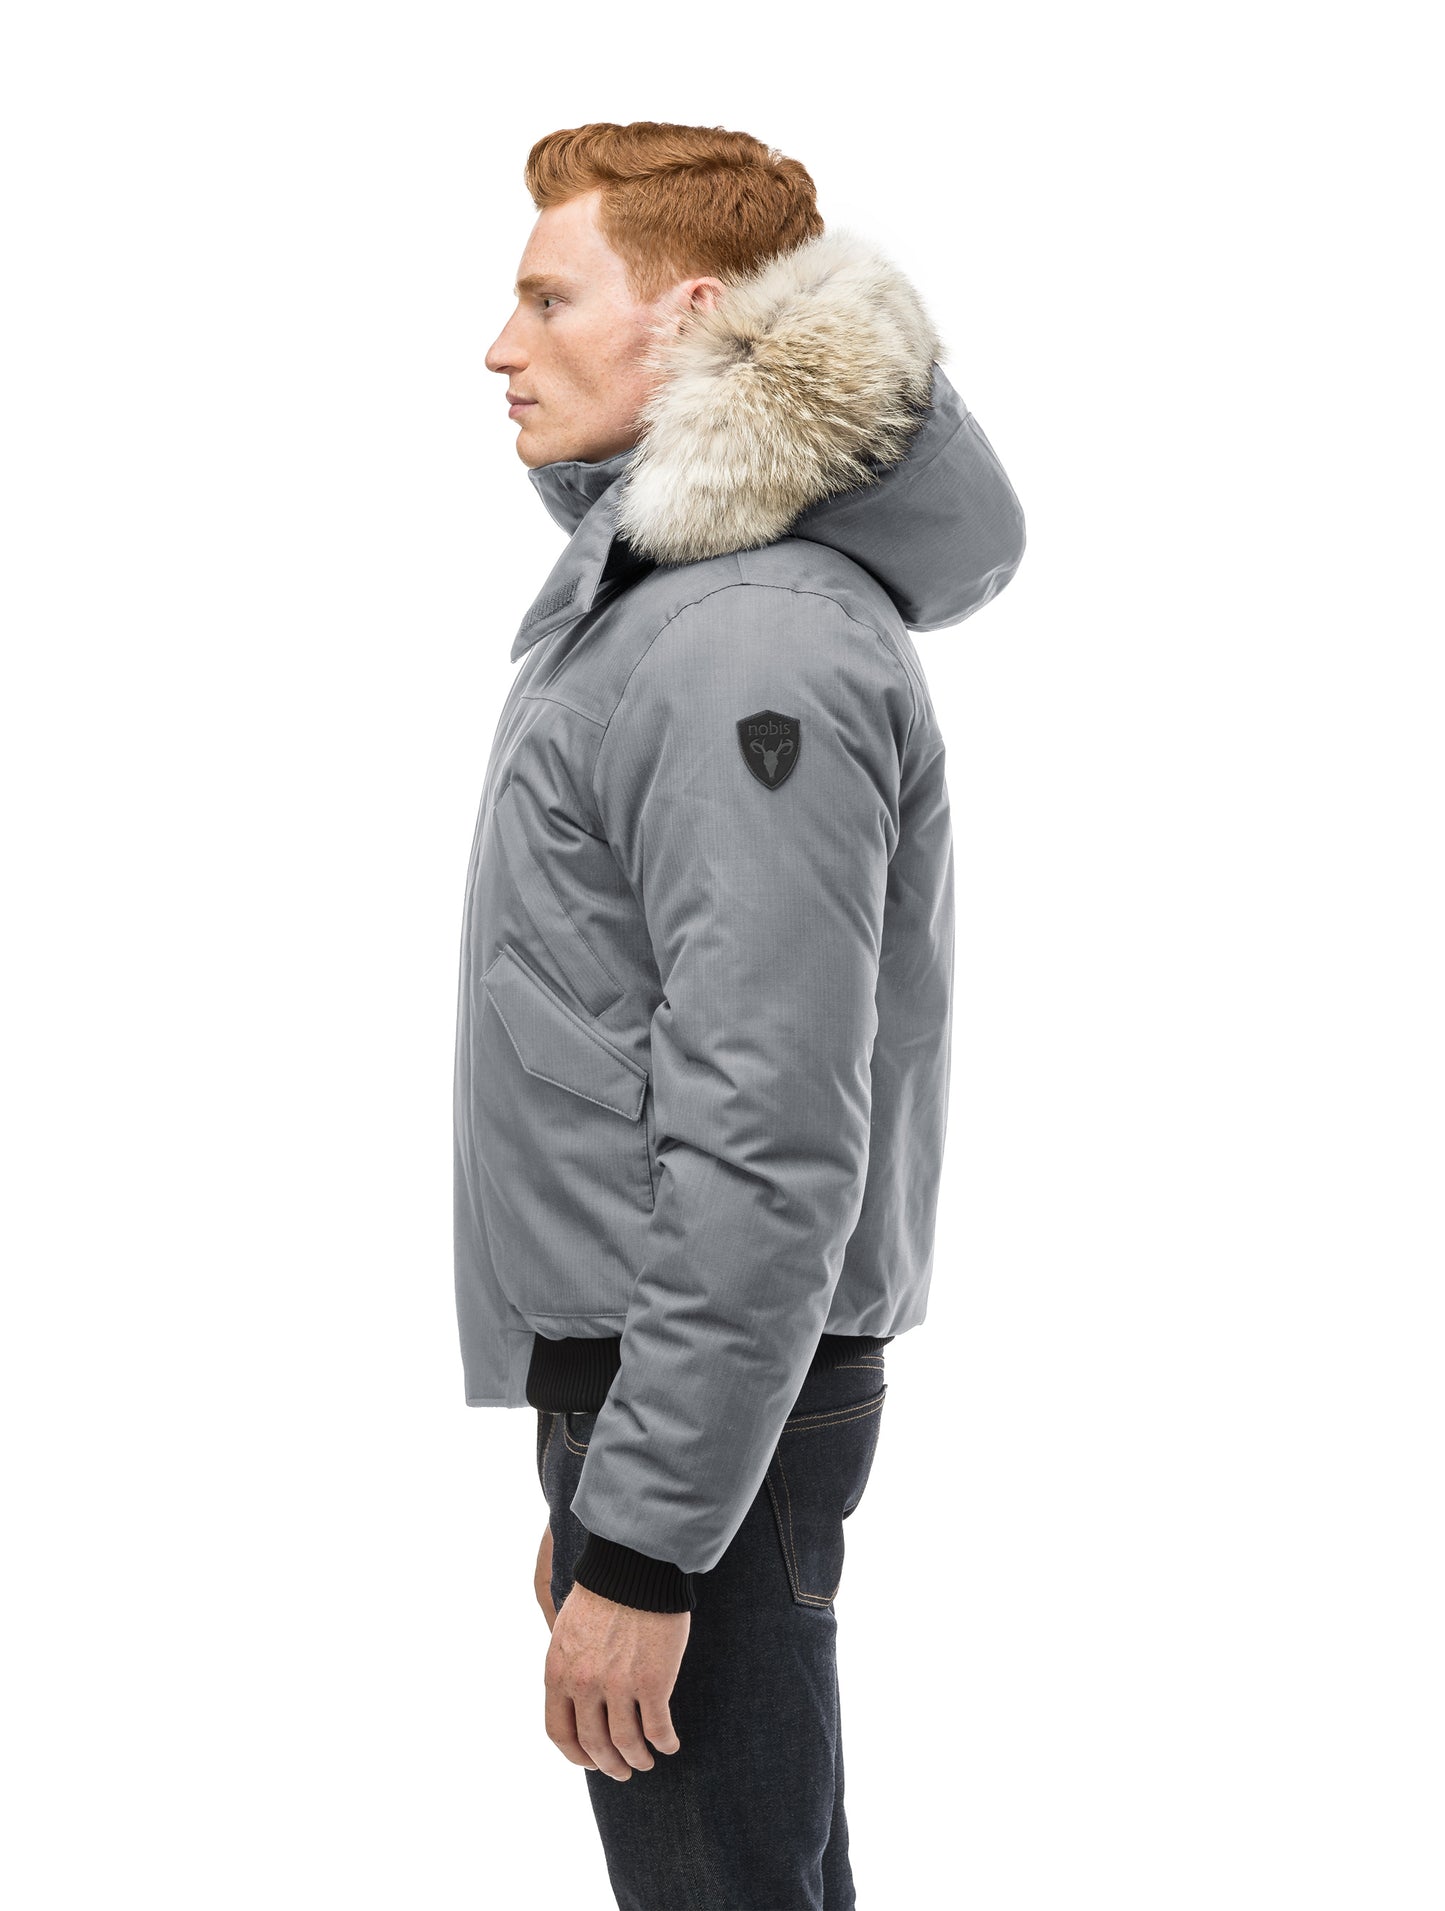 Men's classic down filled bomber jacket with a down filled hood that features a removable coyote fur trim and concealed moldable framing wire in Concrete